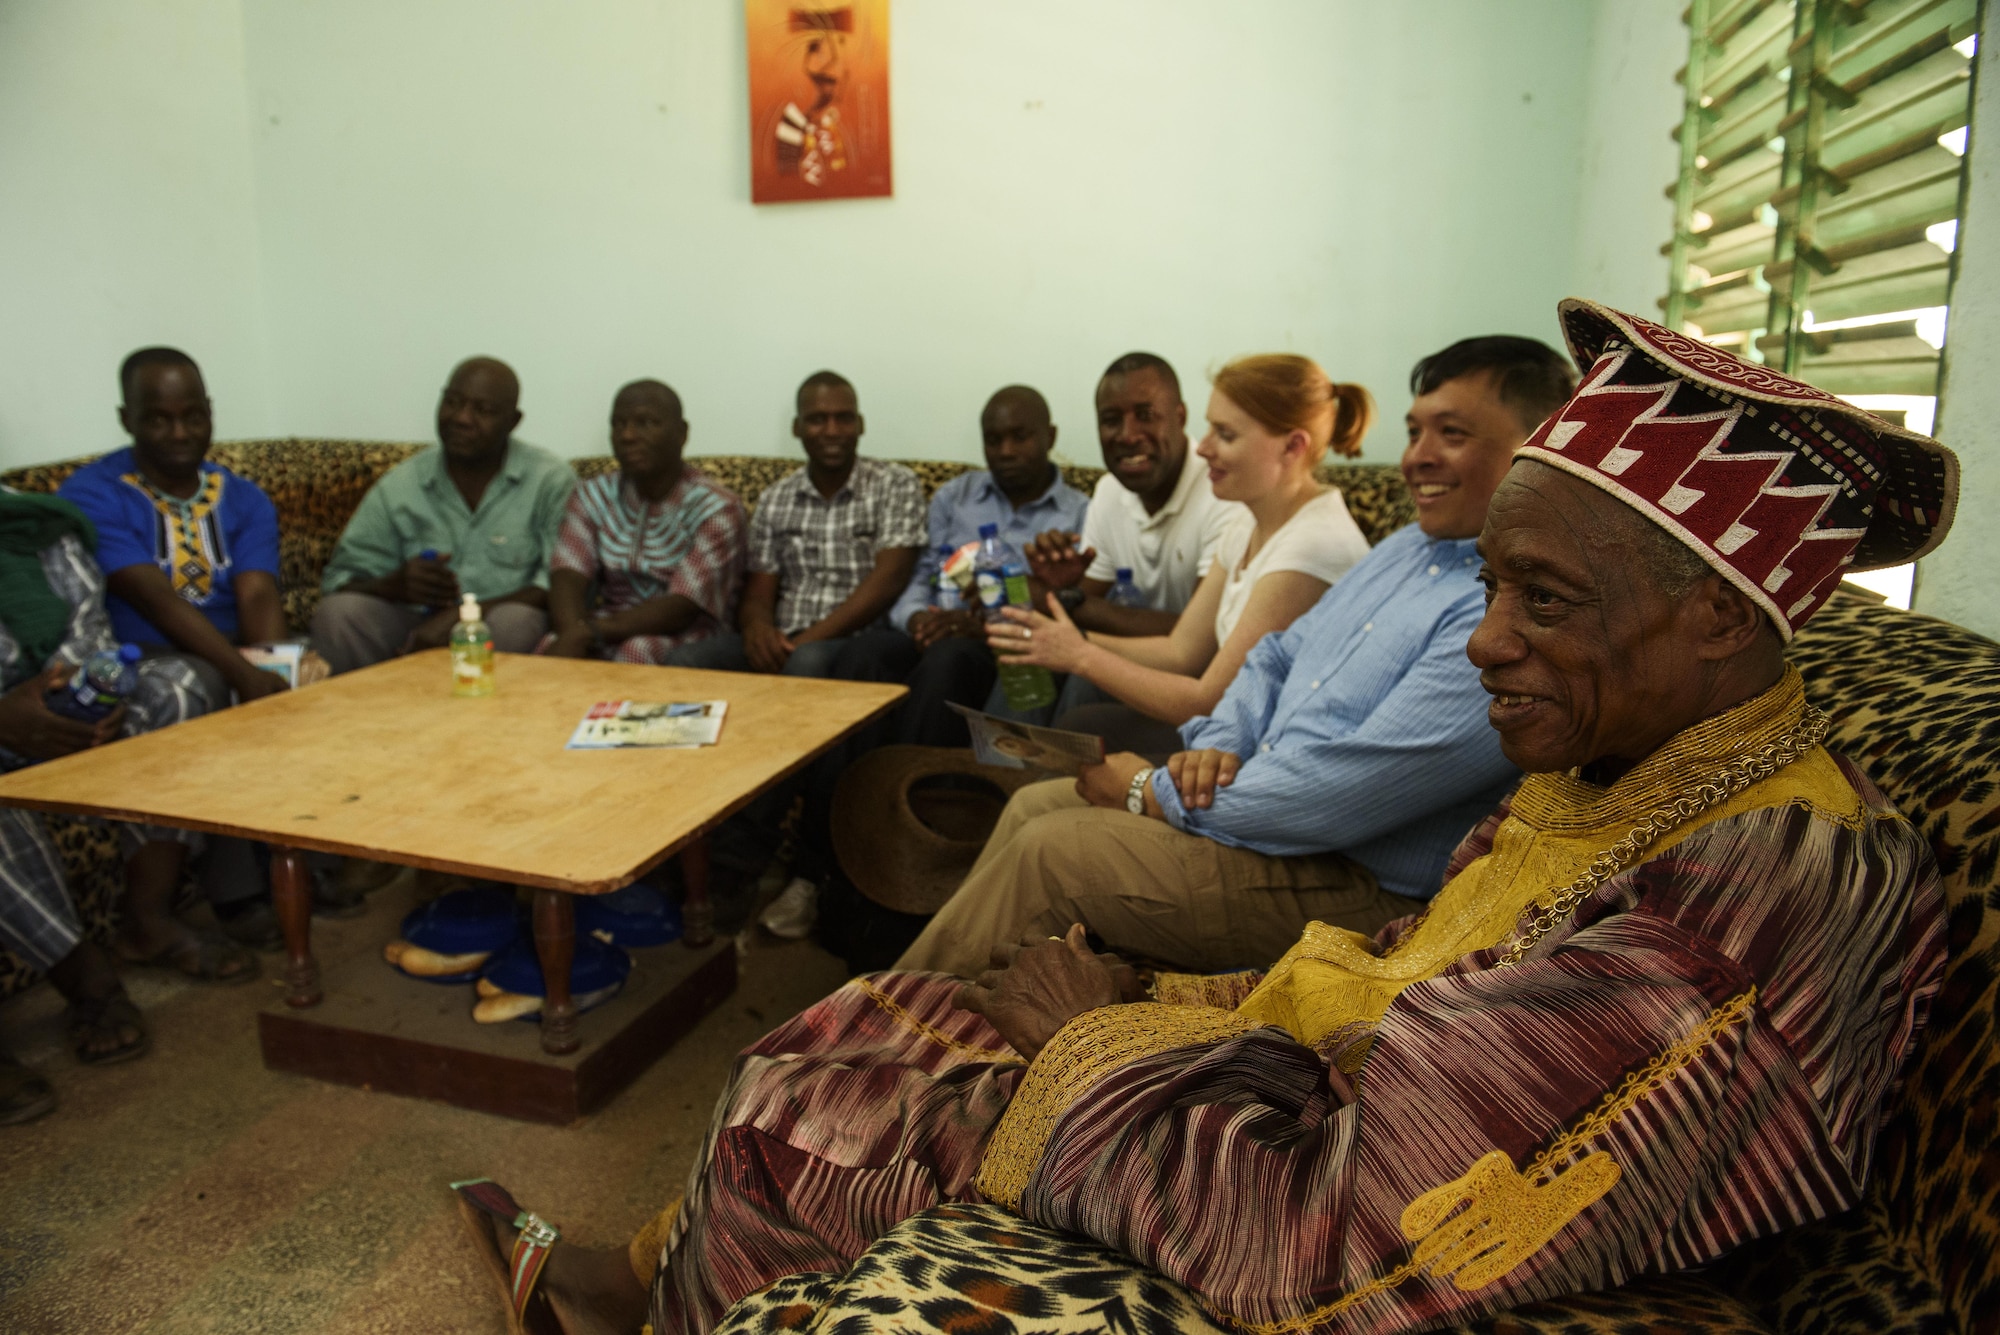 Participants of African Partnership Flight talks with Titinga Frédéric Pacéré, during a cultural tour near Ouagadougou, Burkina Faso, April 17, 2017. APF in Burkina Faso hosted participants from Chad, Mali, Mauritania, Niger, Cote d’Ivoire and Morocco to help strengthen relationships and share best practices. (U.S. Air Force photo by Staff Sgt. Jonathan Snyder)